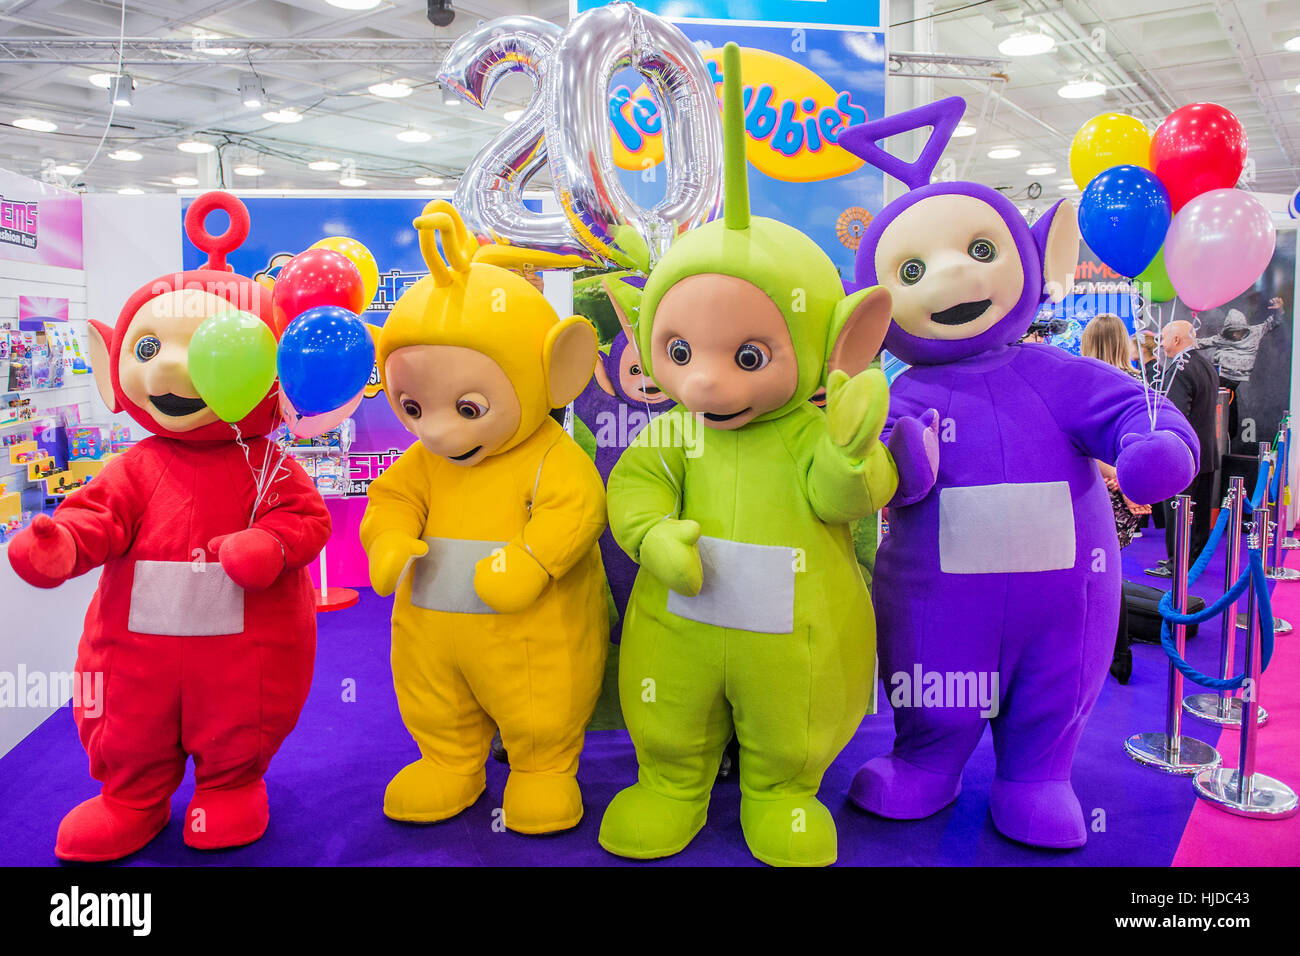 London, UK. 24th Jan, 2017. The Teletubbies celebrate their 20th anniversary - The London Toy Fair opens at Olympia exhibition centre. Organised by the British Toy and Hobby Association it is the only dedicated toy, game and hobby trade exhibition in the UK. It runs for three days, with more than 240 exhibiting companies ranging from the large internationals to the new start up companies. London 24/01/17 Credit: Guy Bell/Alamy Live News Stock Photo